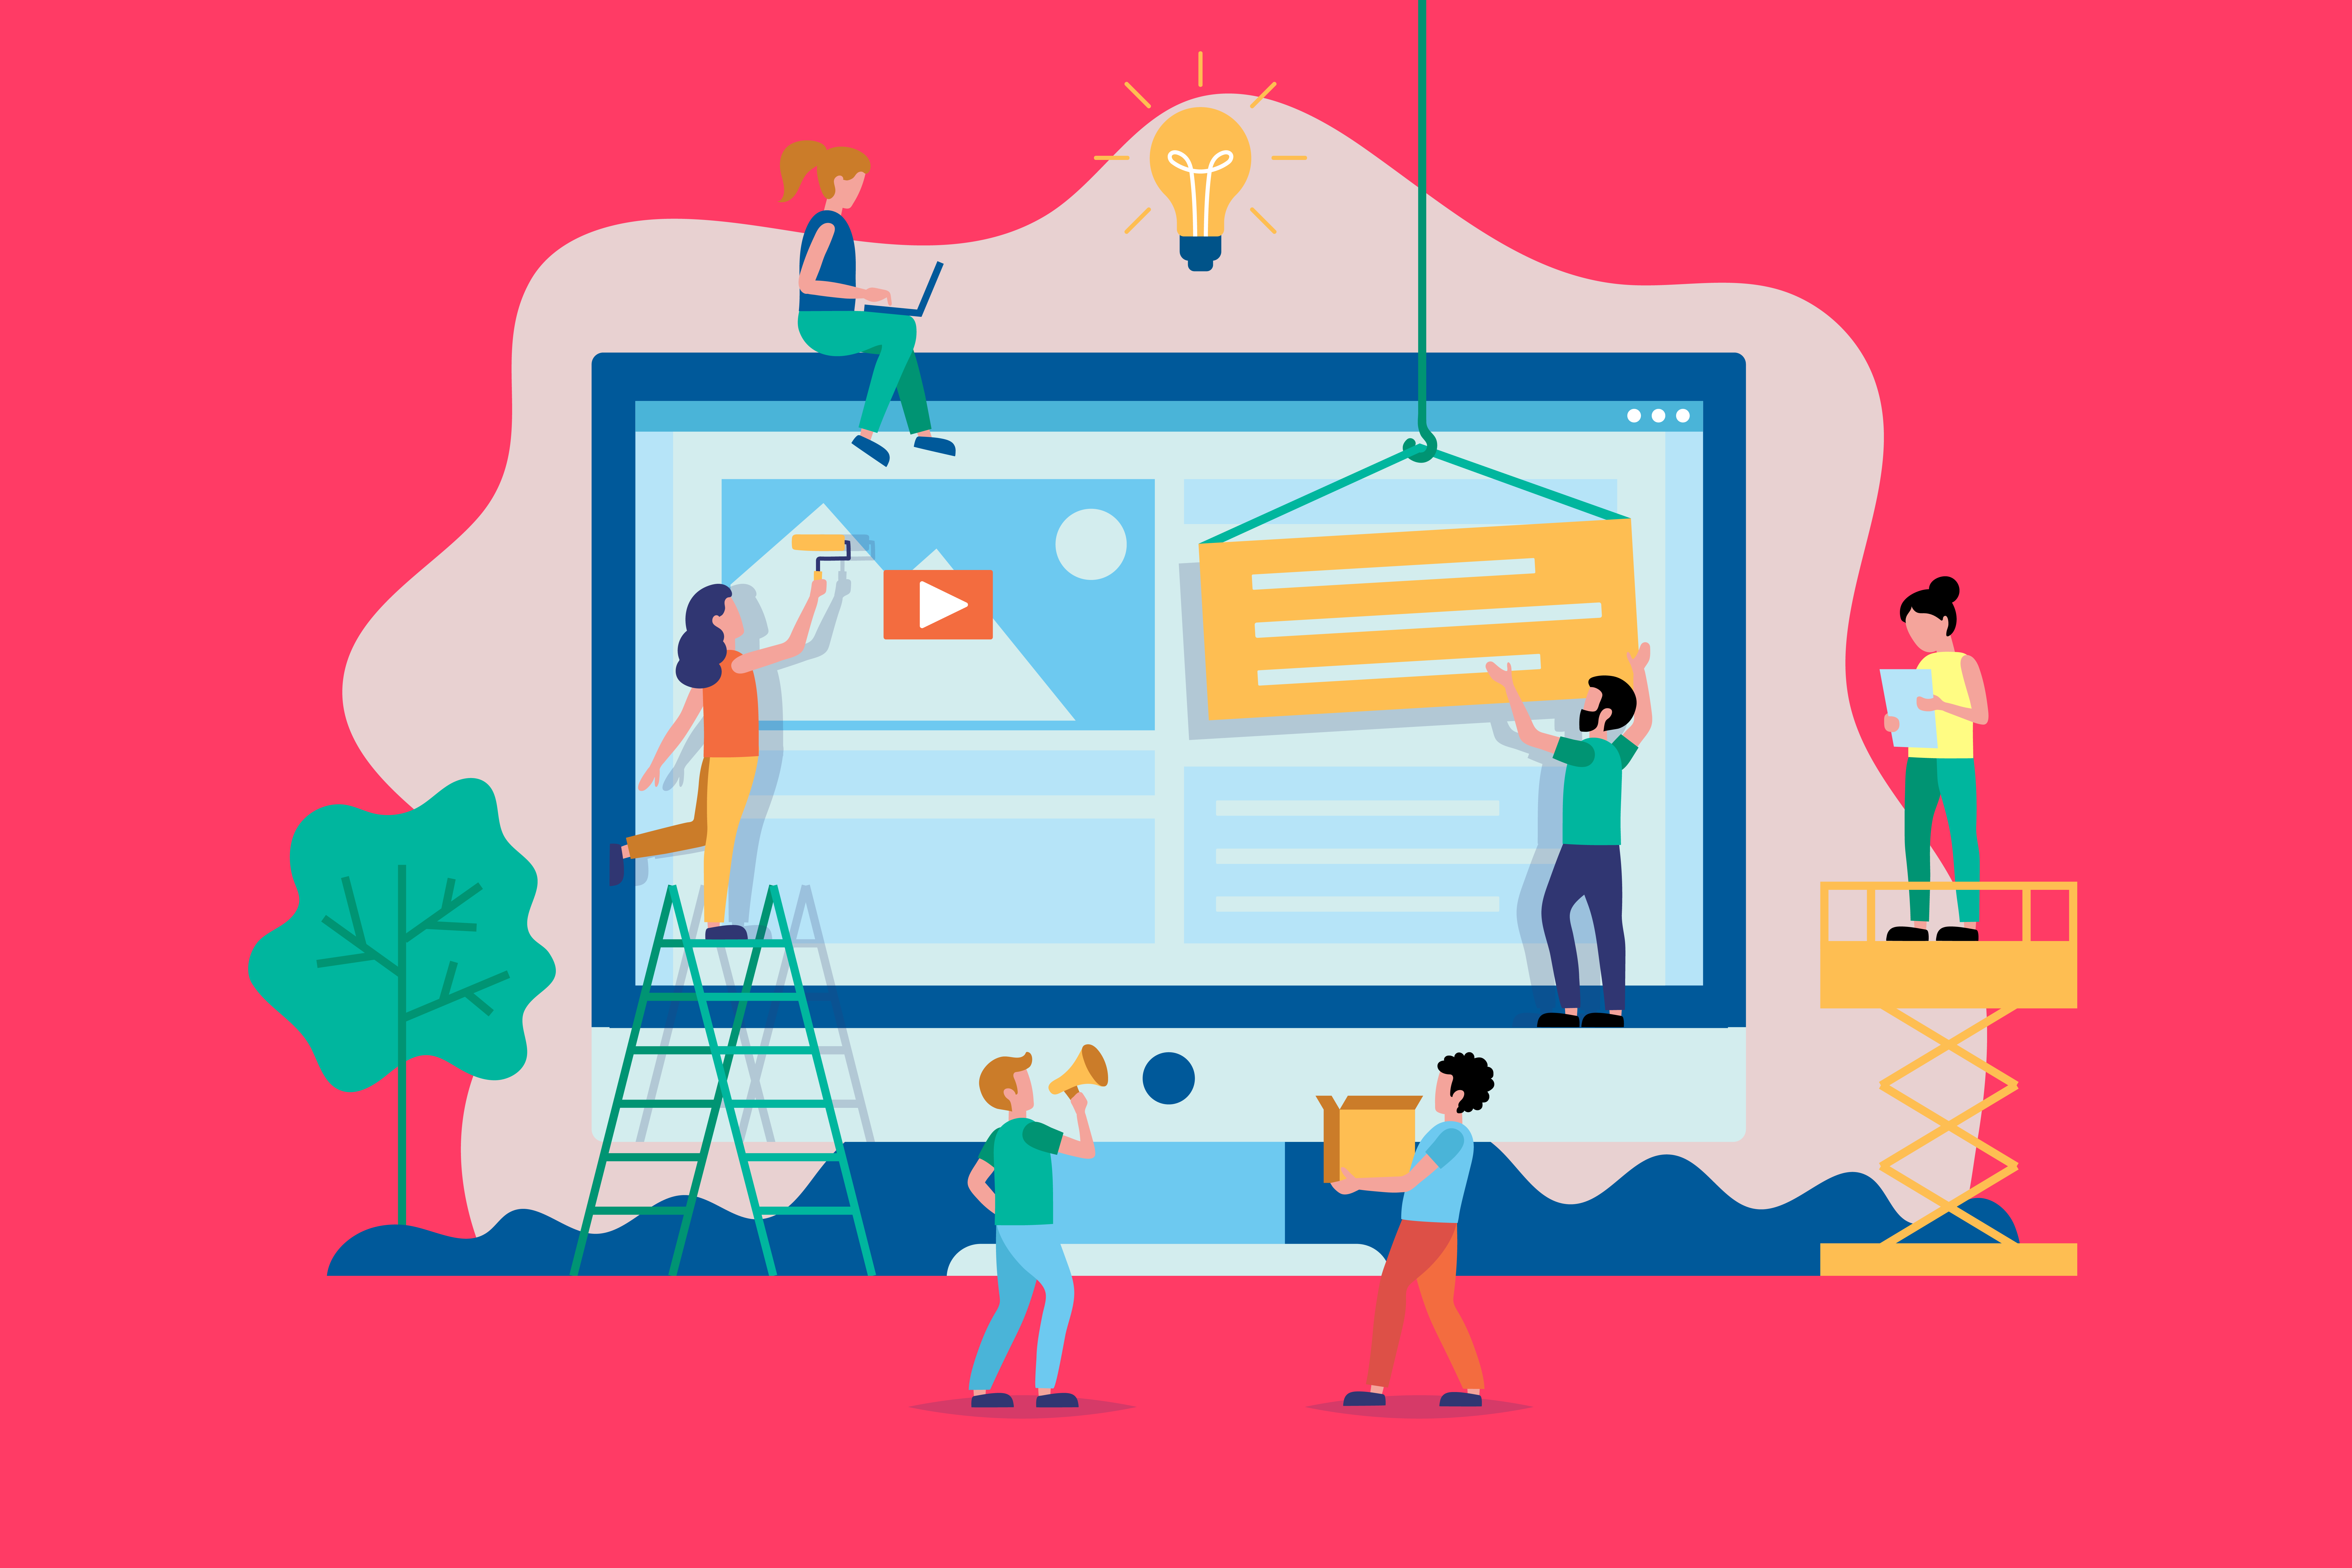 A colorful illustration depicting a group of miniature people engaging in various activities on and around a large, stylized computer screen against a pink background, symbolizing website or digital content creation.